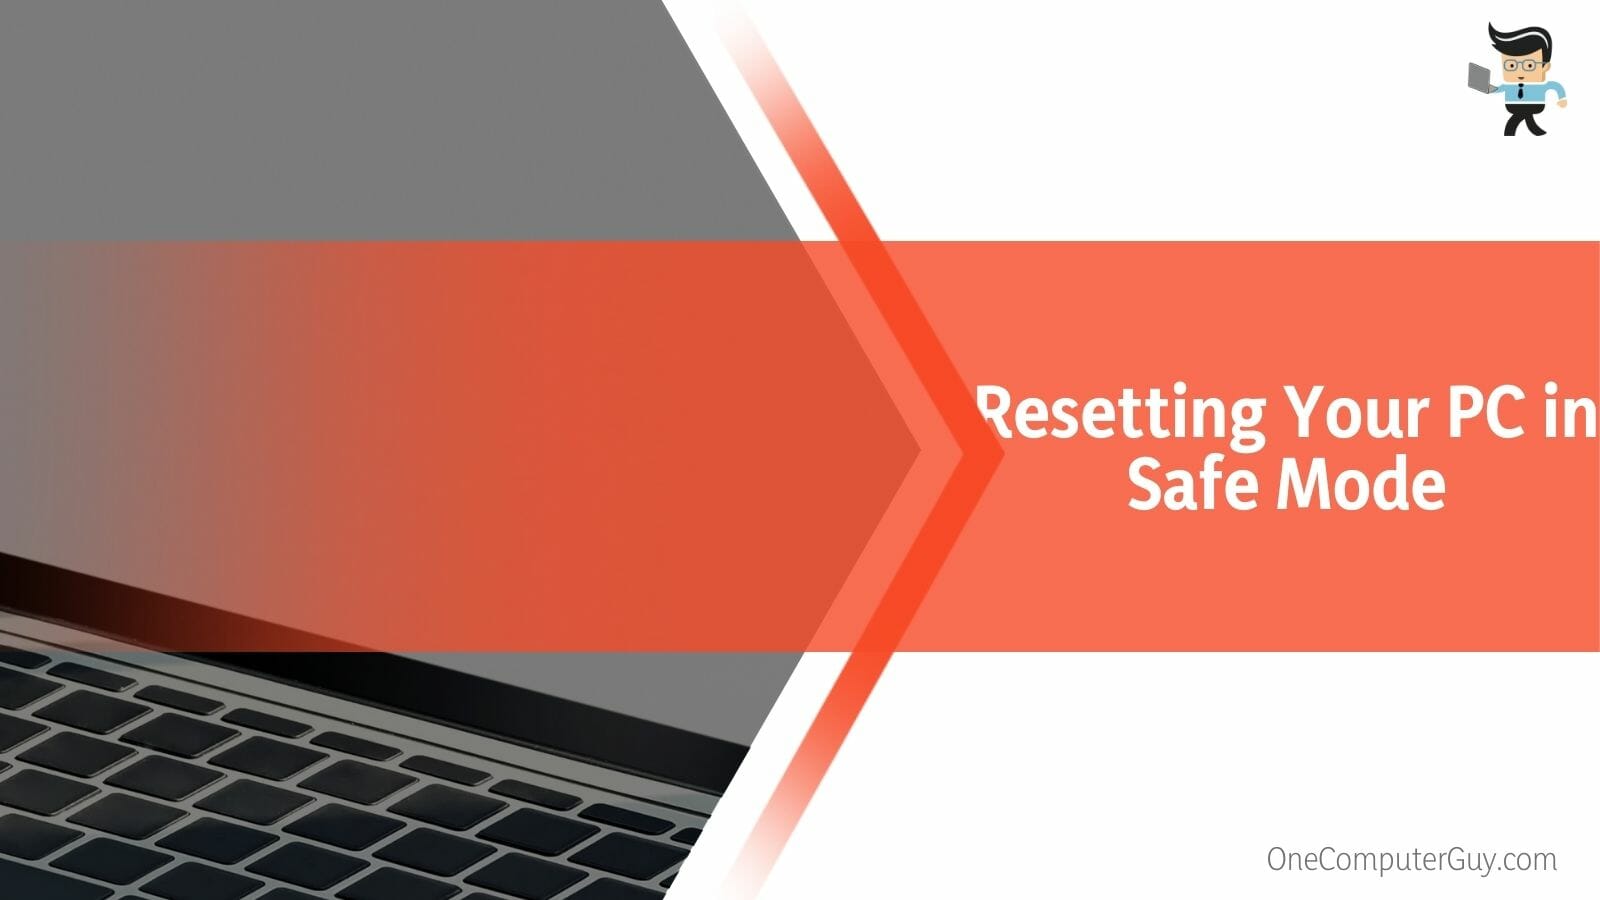 Resetting Your PC in Safe Mode